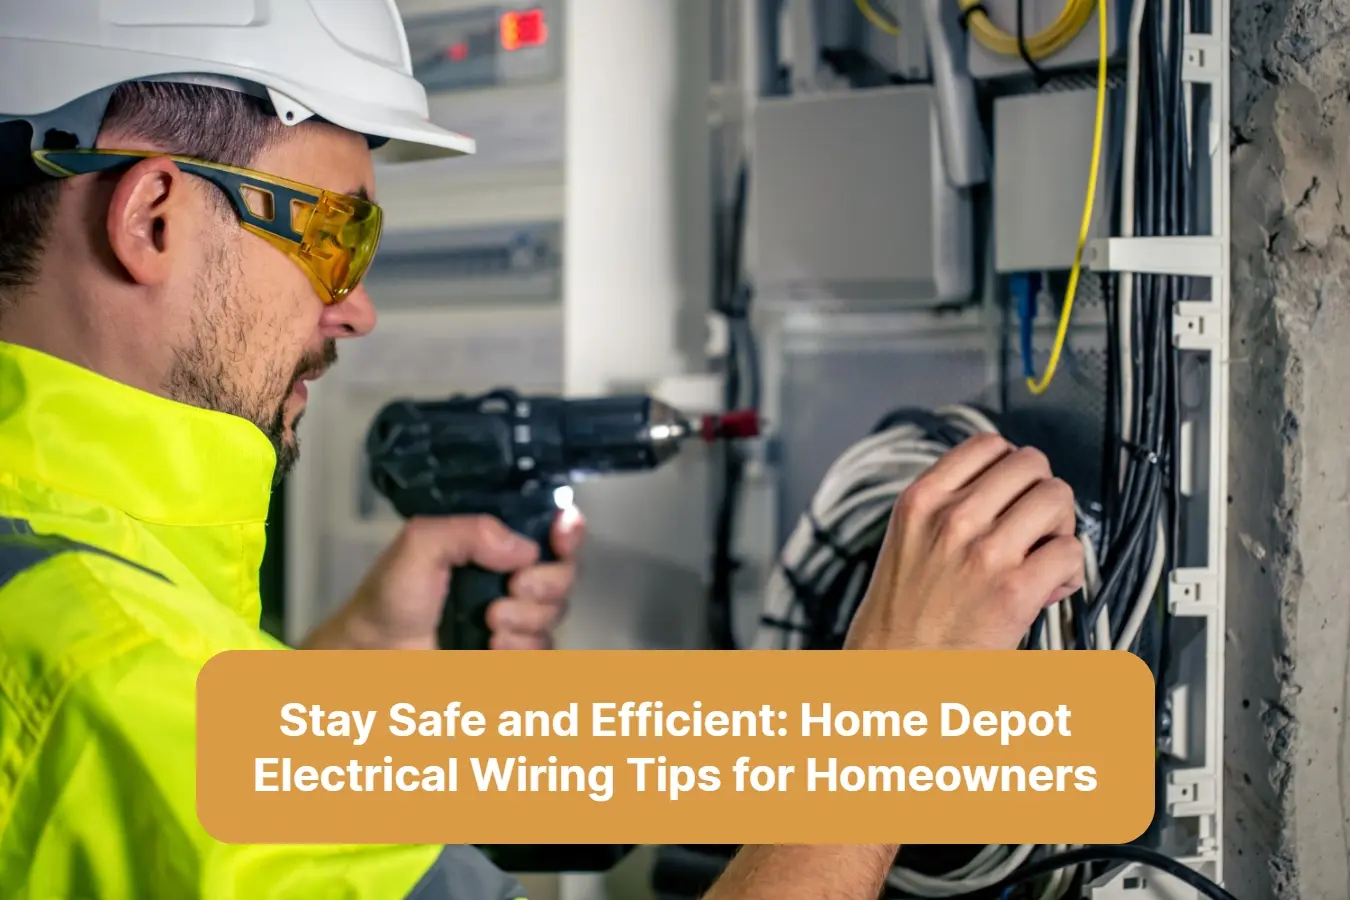 Stay Safe and Efficient Home Depot Electrical Wiring Tips for Homeowners